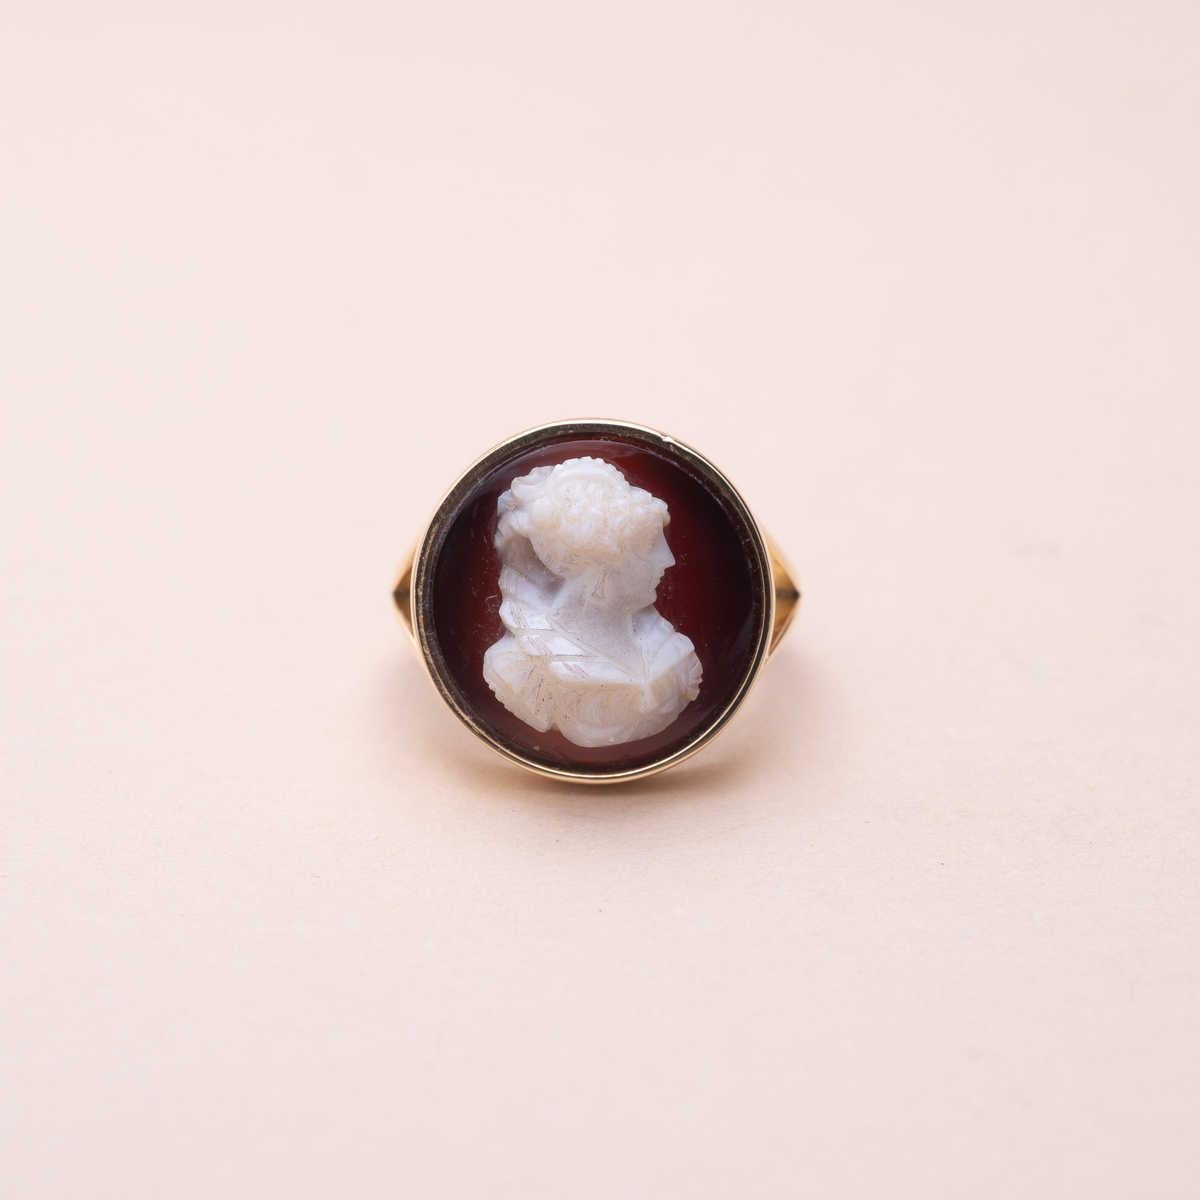 18K gold sardonyx cameo ring depicting a woman in the gothic revival style 
Cameo circa 1880 
Diameter : 18mm
Ring size : 55 FR
Eagle's head hallmark 
Gross weight : 7.73g 
Ring from our Precious Recycling brand : upcycle, re-use and transform